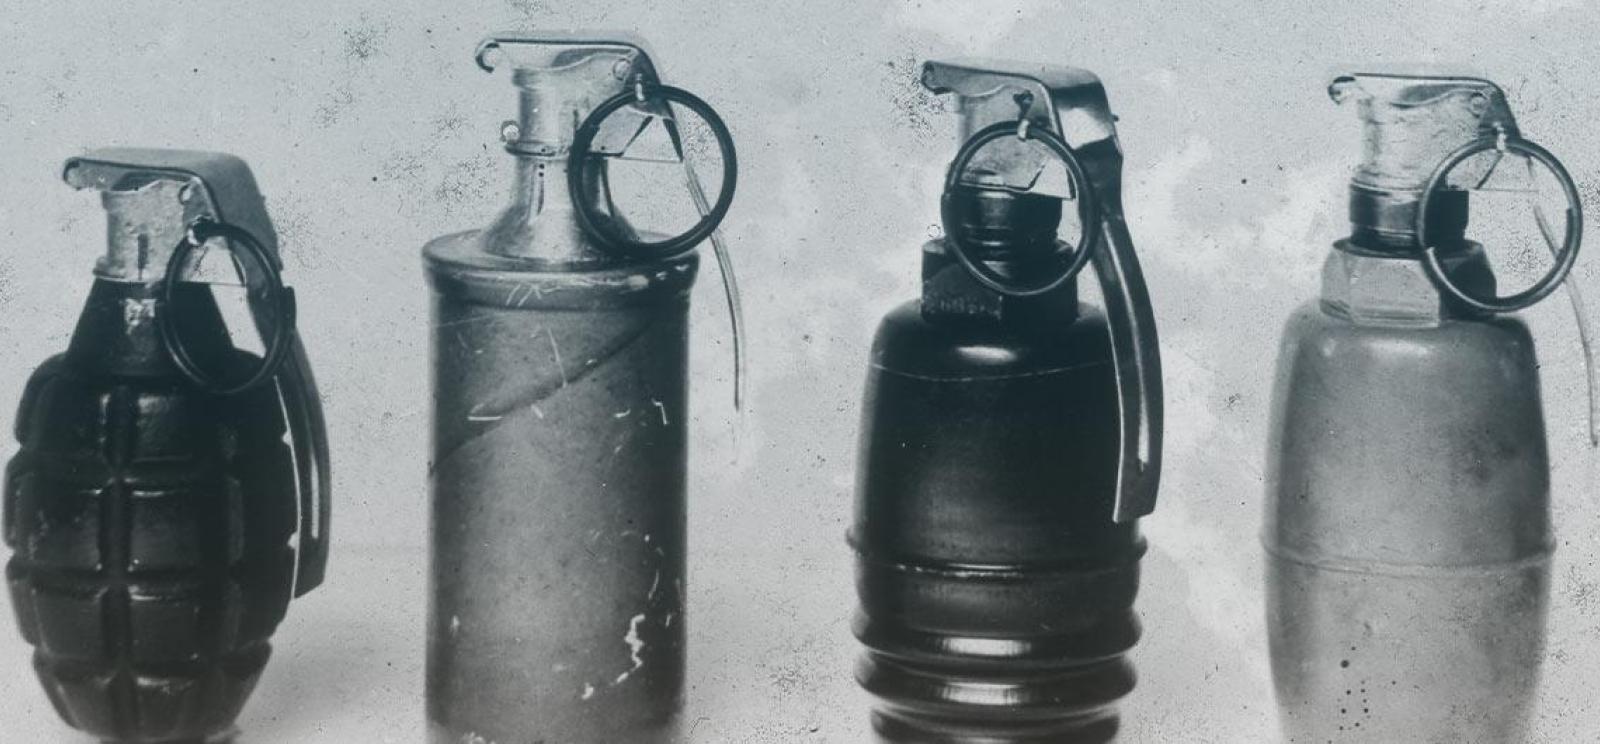 Black and white photograph of four grenades lined up in a row, each of different sizes and shapes.